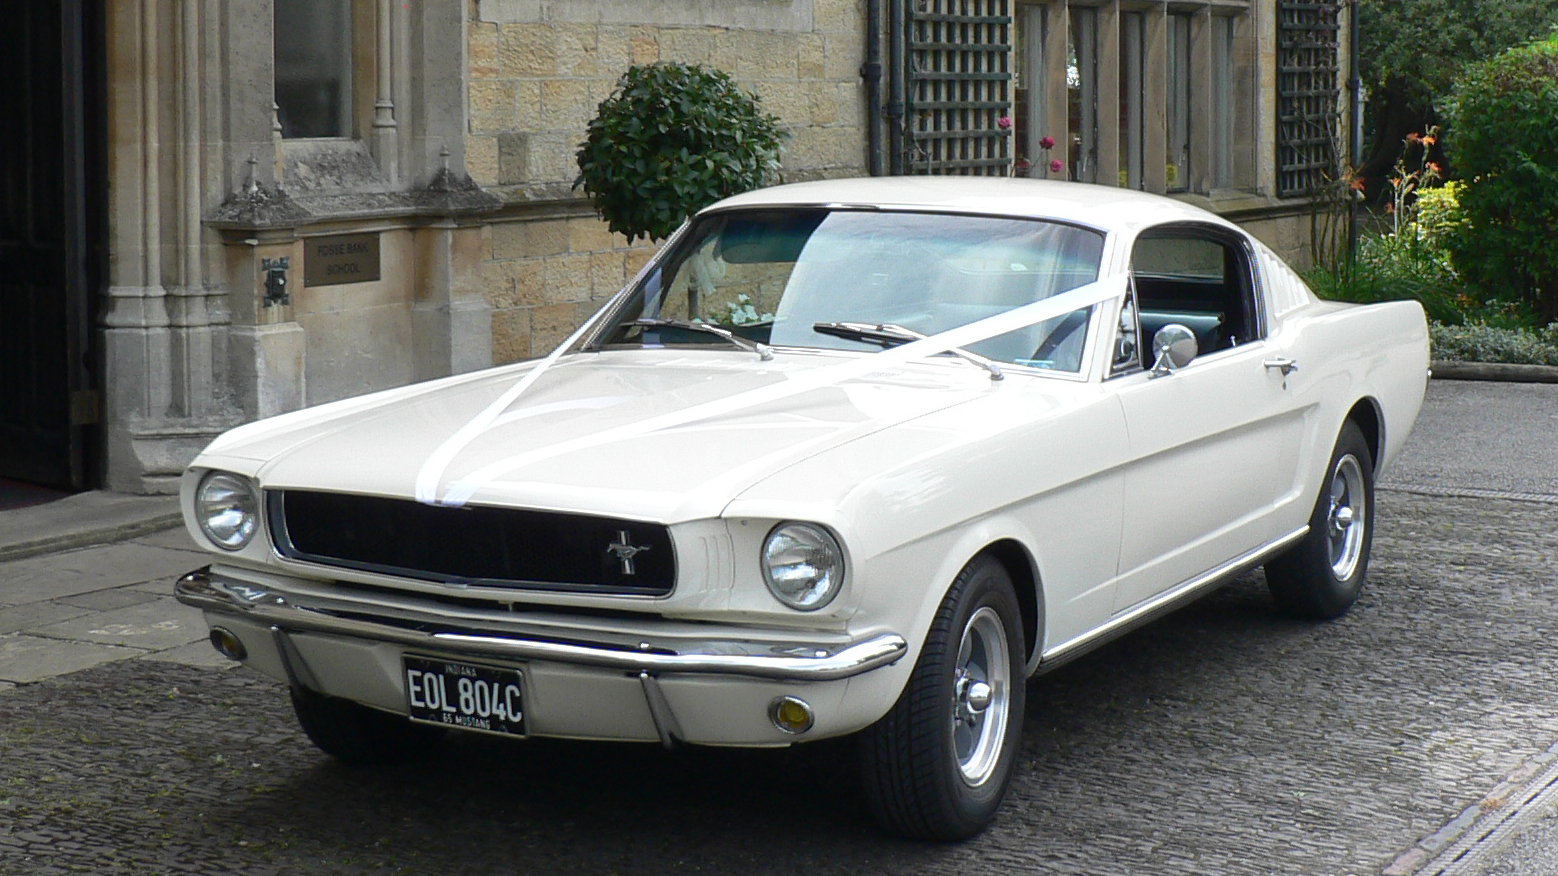 Ford Mustang Fastback V8 wedding car for hire in Hartfield, East Sussex